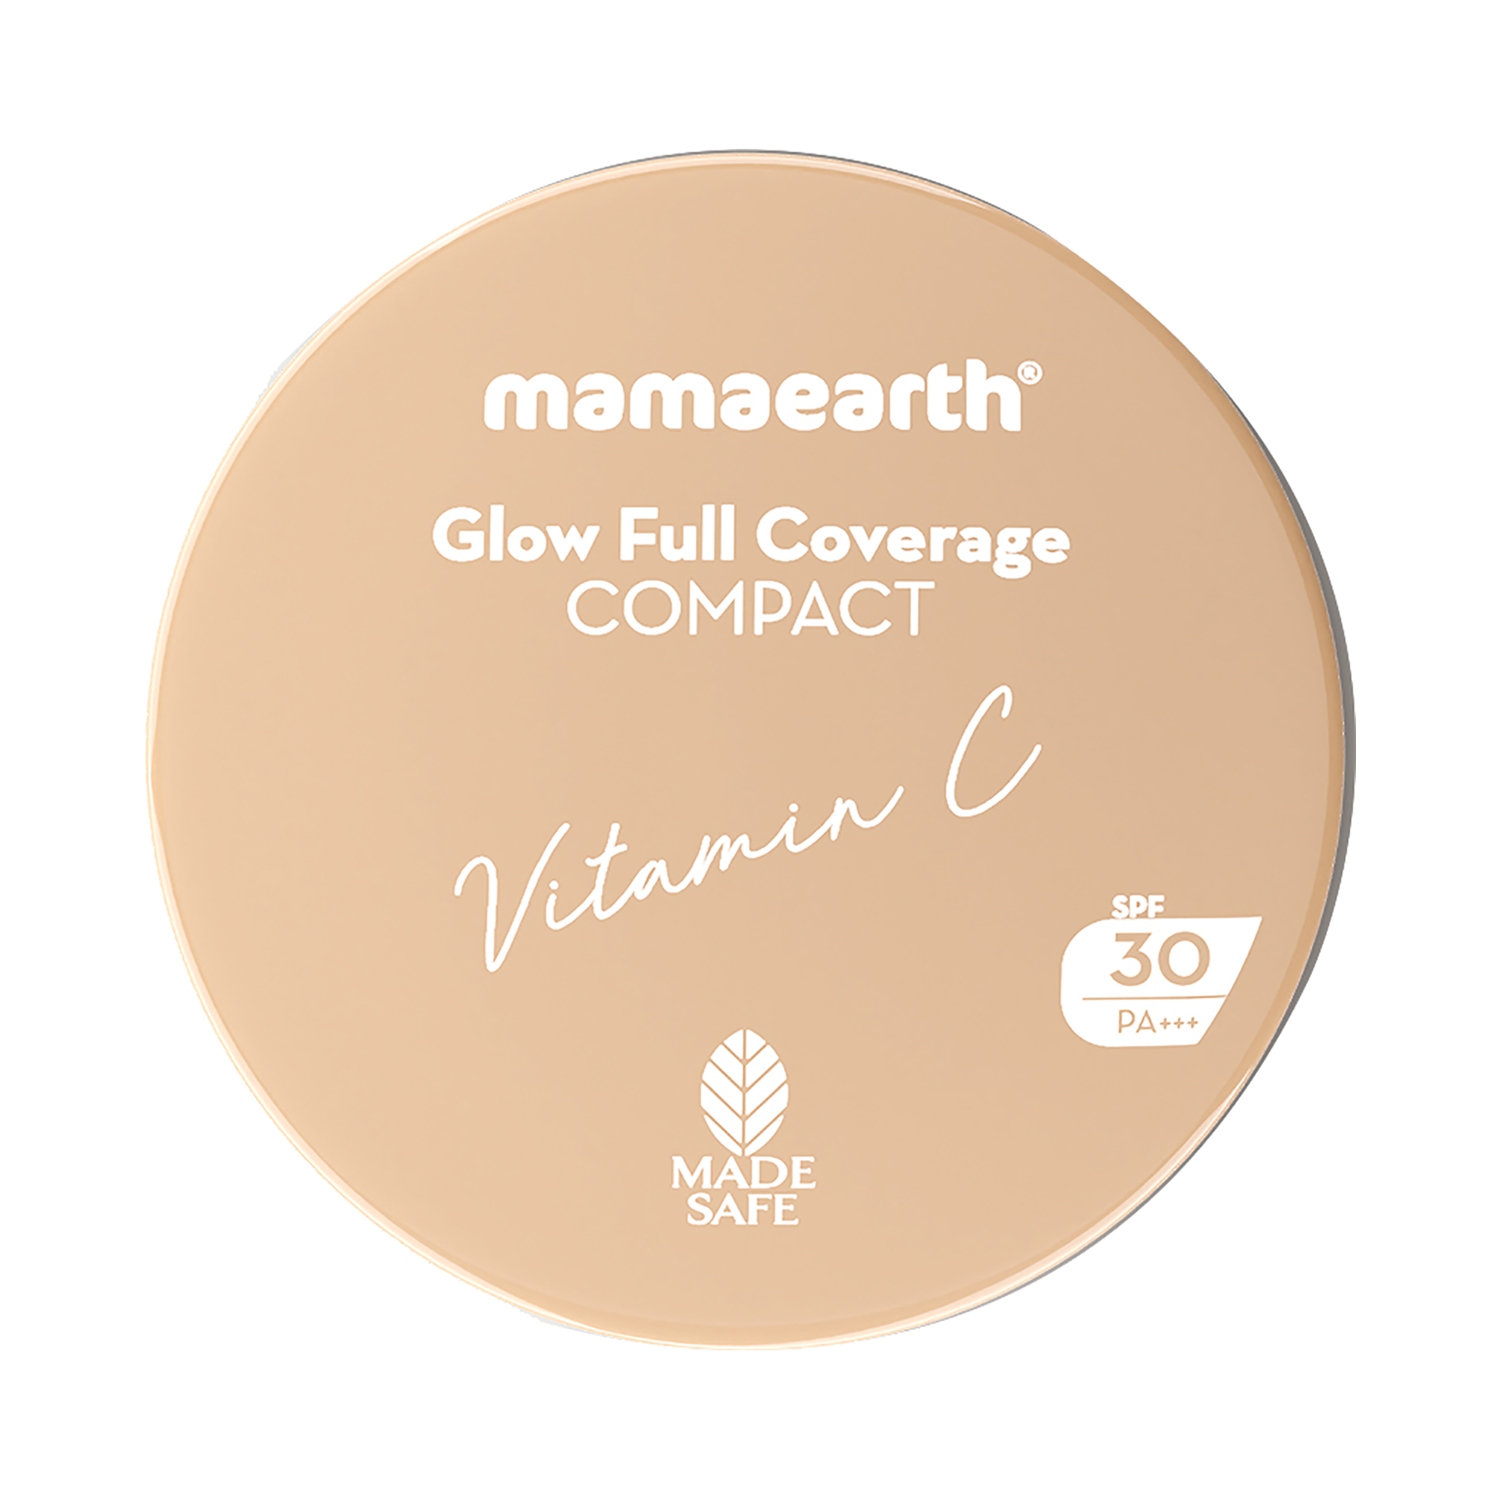 Mamaearth | Mamaearth Glow Full Coverage Compact SPF 30 PA+++ With Vitamin C - 02 Ivory Glow (9g)